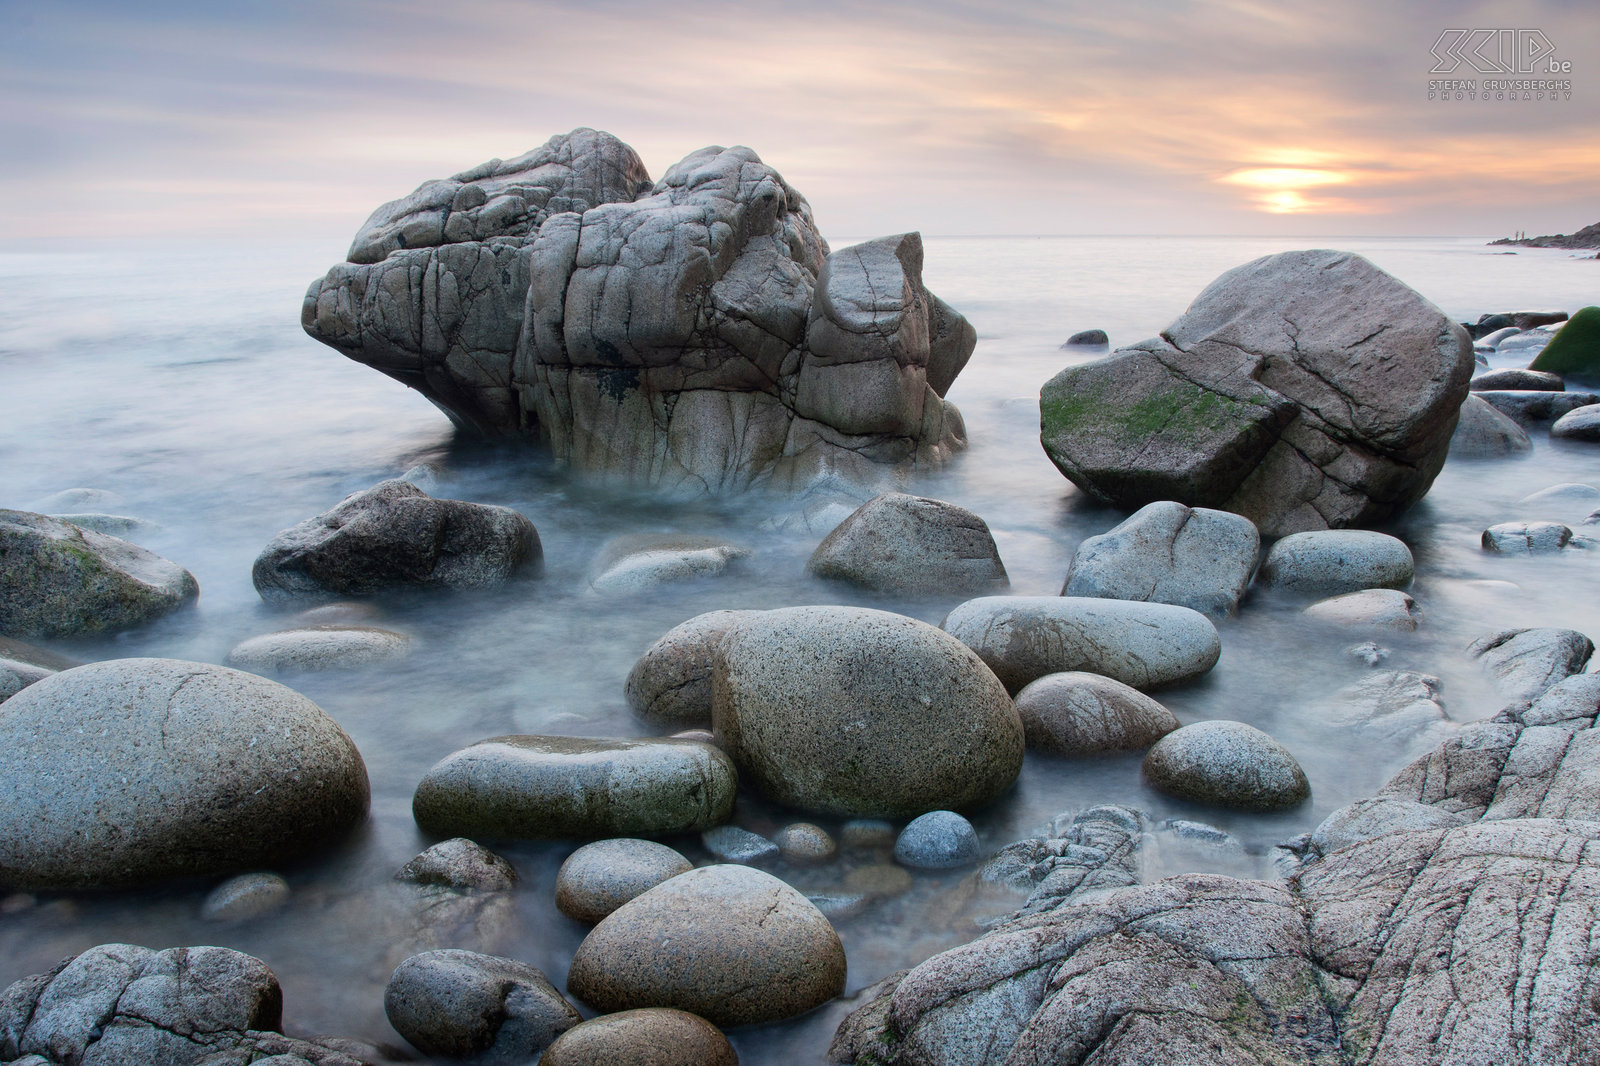 Sunset at Porth Nanven / Cot Valley Beach Porth Nanven / Cot Valley Beach is sometimes referred to as 'Dinosaur Egg Beach' because of the remarkable ovoid boulders and beautiful rock formations. The third evening there was a wonderful sunset. Stefan Cruysberghs